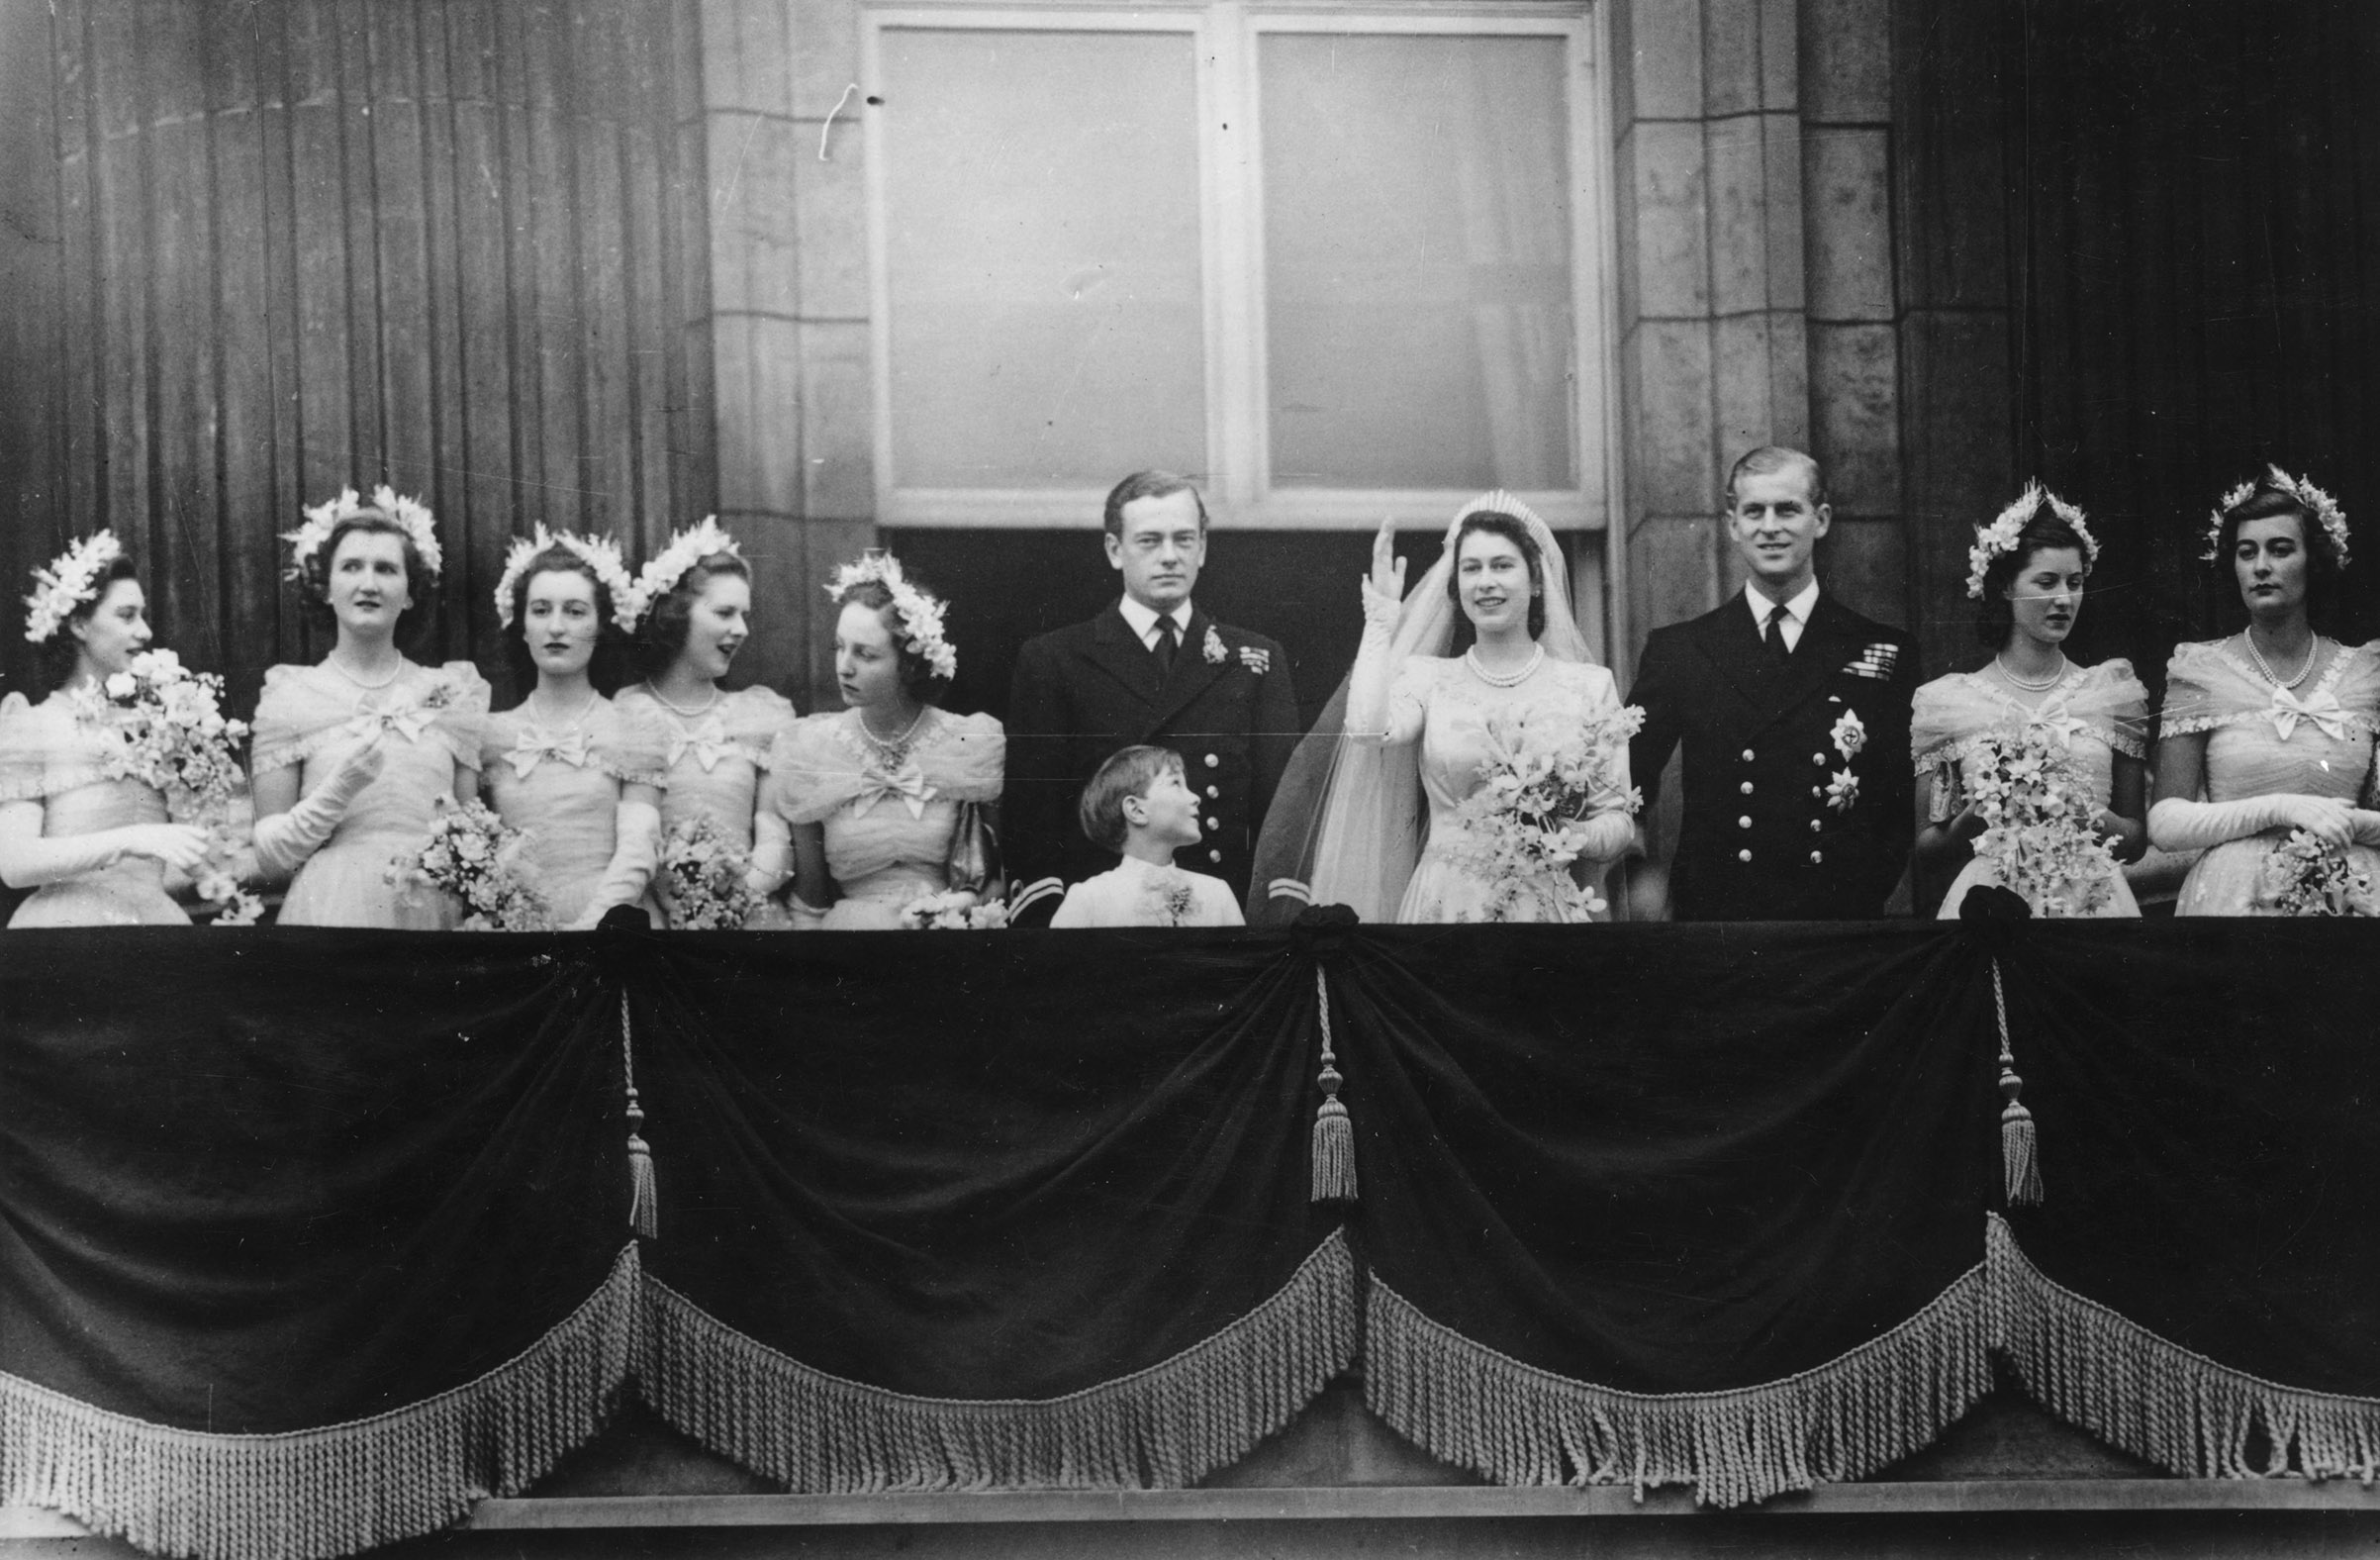 20th November 1947: The royal group on the balcony of Buckingham Palace after returning from the wedding ceremony between Princess Elizabeth and the Duke of Edinburgh at Westminster Abbey. (left to right) Princess Margaret (1930 - 2002), Margaret Elphinstone, Diana Bowes-Lyon, Lady Caroline Montague Douglas-Scott, Lady Elizabeth Lambert, the Marquis of Milford-Haven, Prince William, the bride and groom, Lady Mary Cambridge and Lady Pamela Mountbatten (Topical Press Agency/Getty Images)